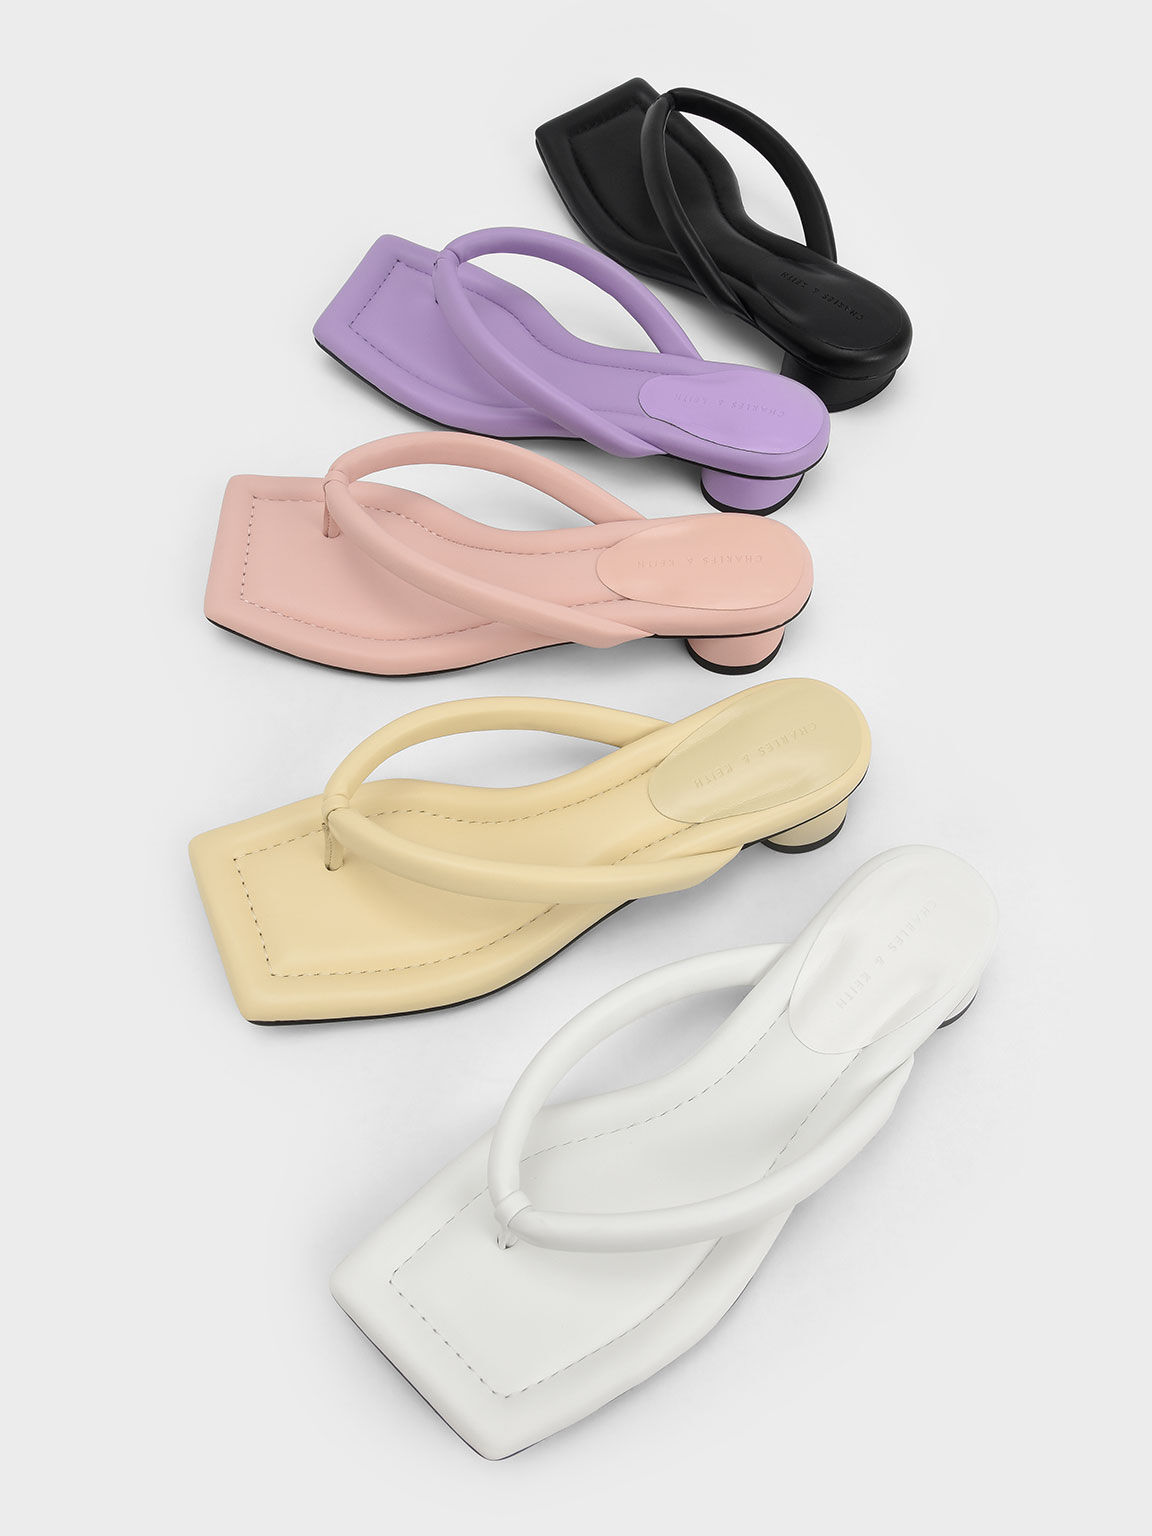 CHARLES & KEITH - The thong sandal is enjoying a revival — our purple  asymmetric-toed version with puffy straps gives the iconic '90s shoe style  a contemporary update. Shop now:   #CharlesKeithCelebrates #